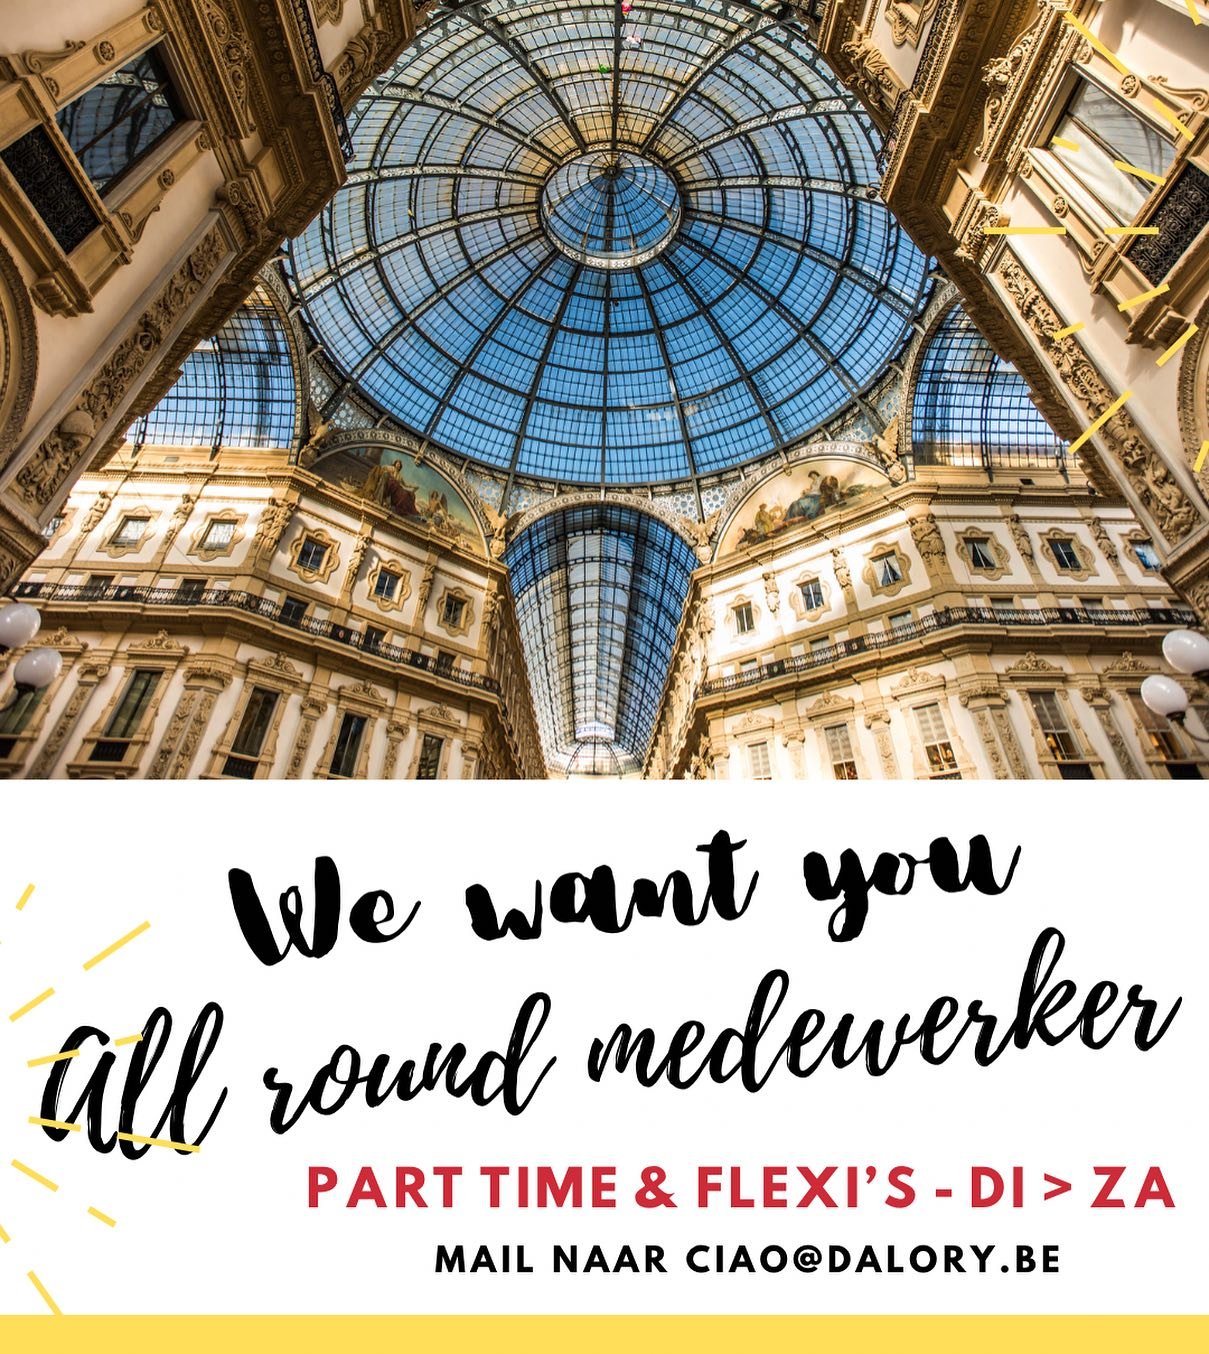 🇮🇹 We want you to join our team. Apply by sending your cv to ciao@dalory.be

#pastificiodalory #wewantyou #ᴊᴏɪɴᴏᴜʀᴛᴇᴀᴍ